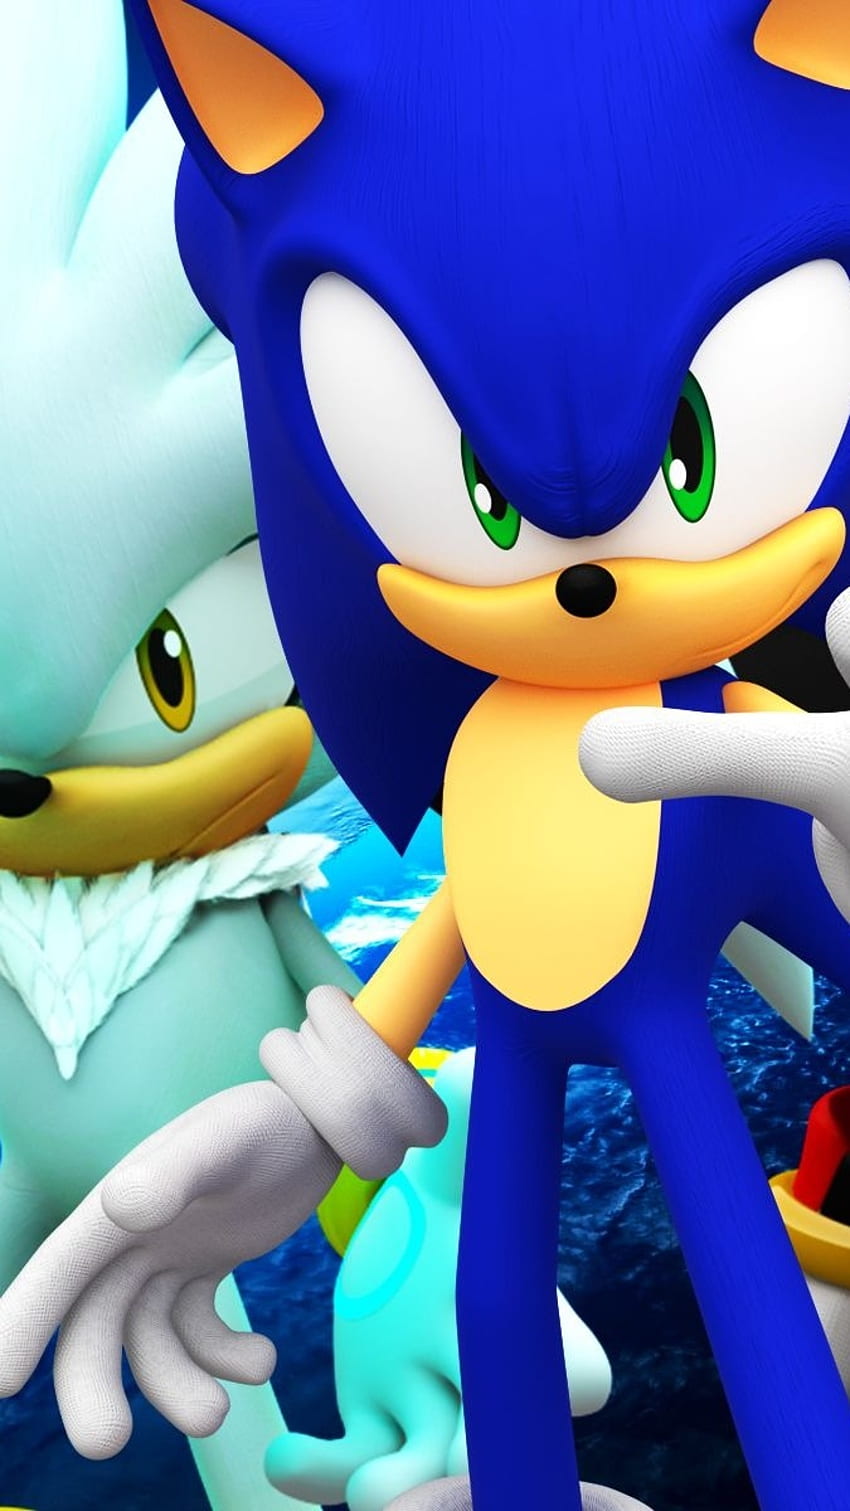 Sonic the Hedgehog 2 gets DVD Bluray and Steelbook release